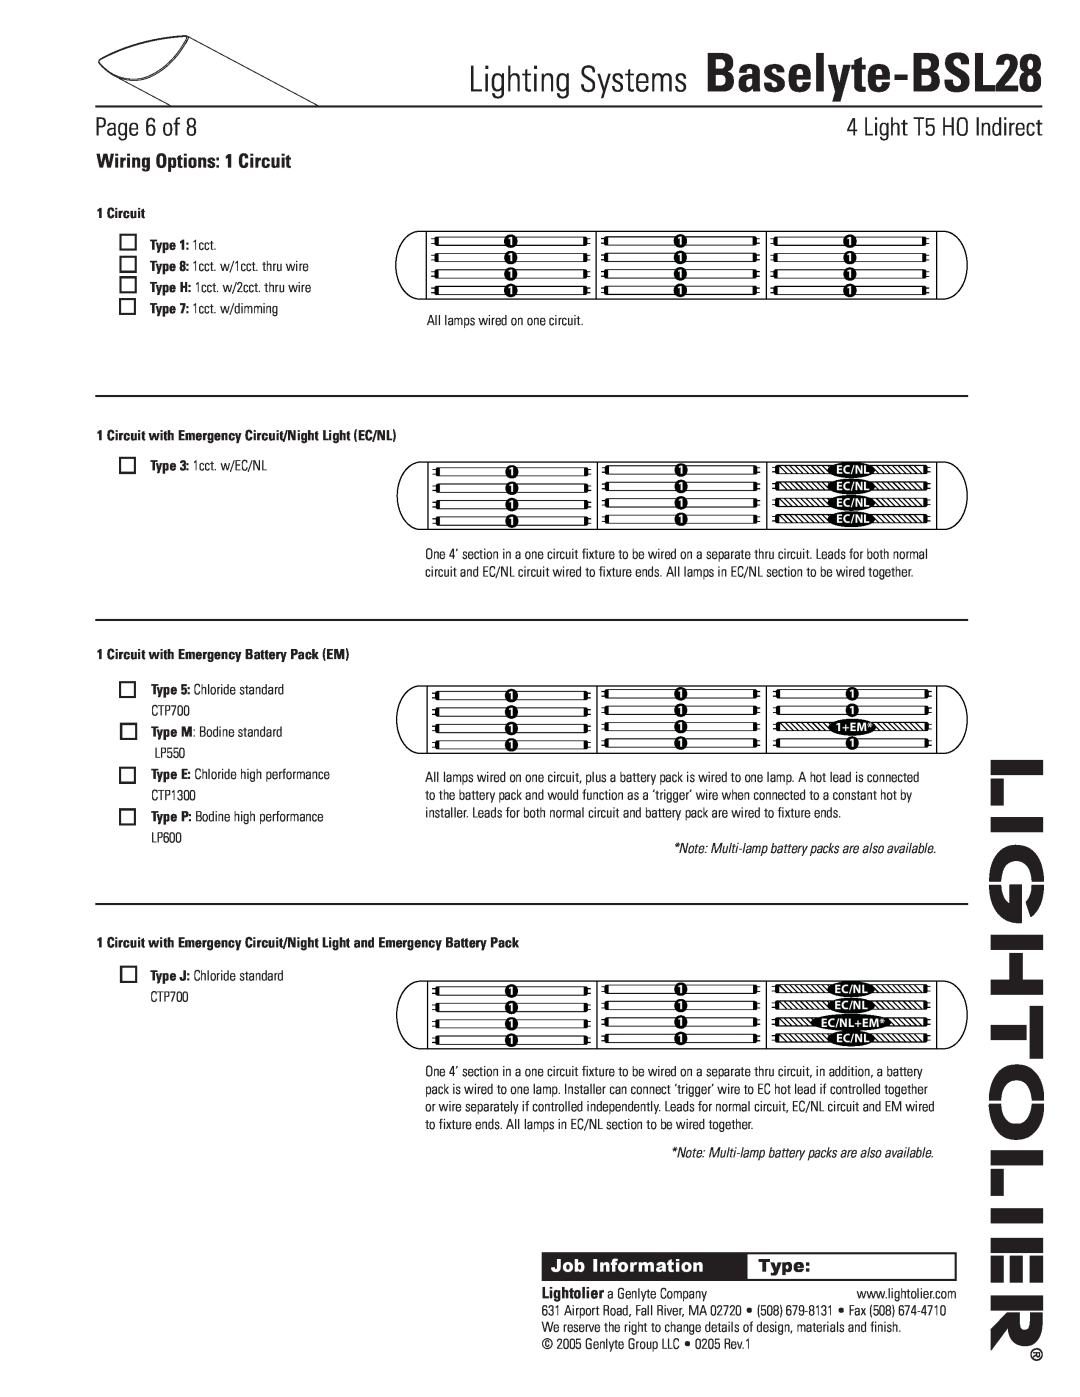 Lightolier Baselyte-BSL28 Wiring Options 1 Circuit, Circuit Type 1 1cct, Circuit with Emergency Battery Pack EM, Page of 